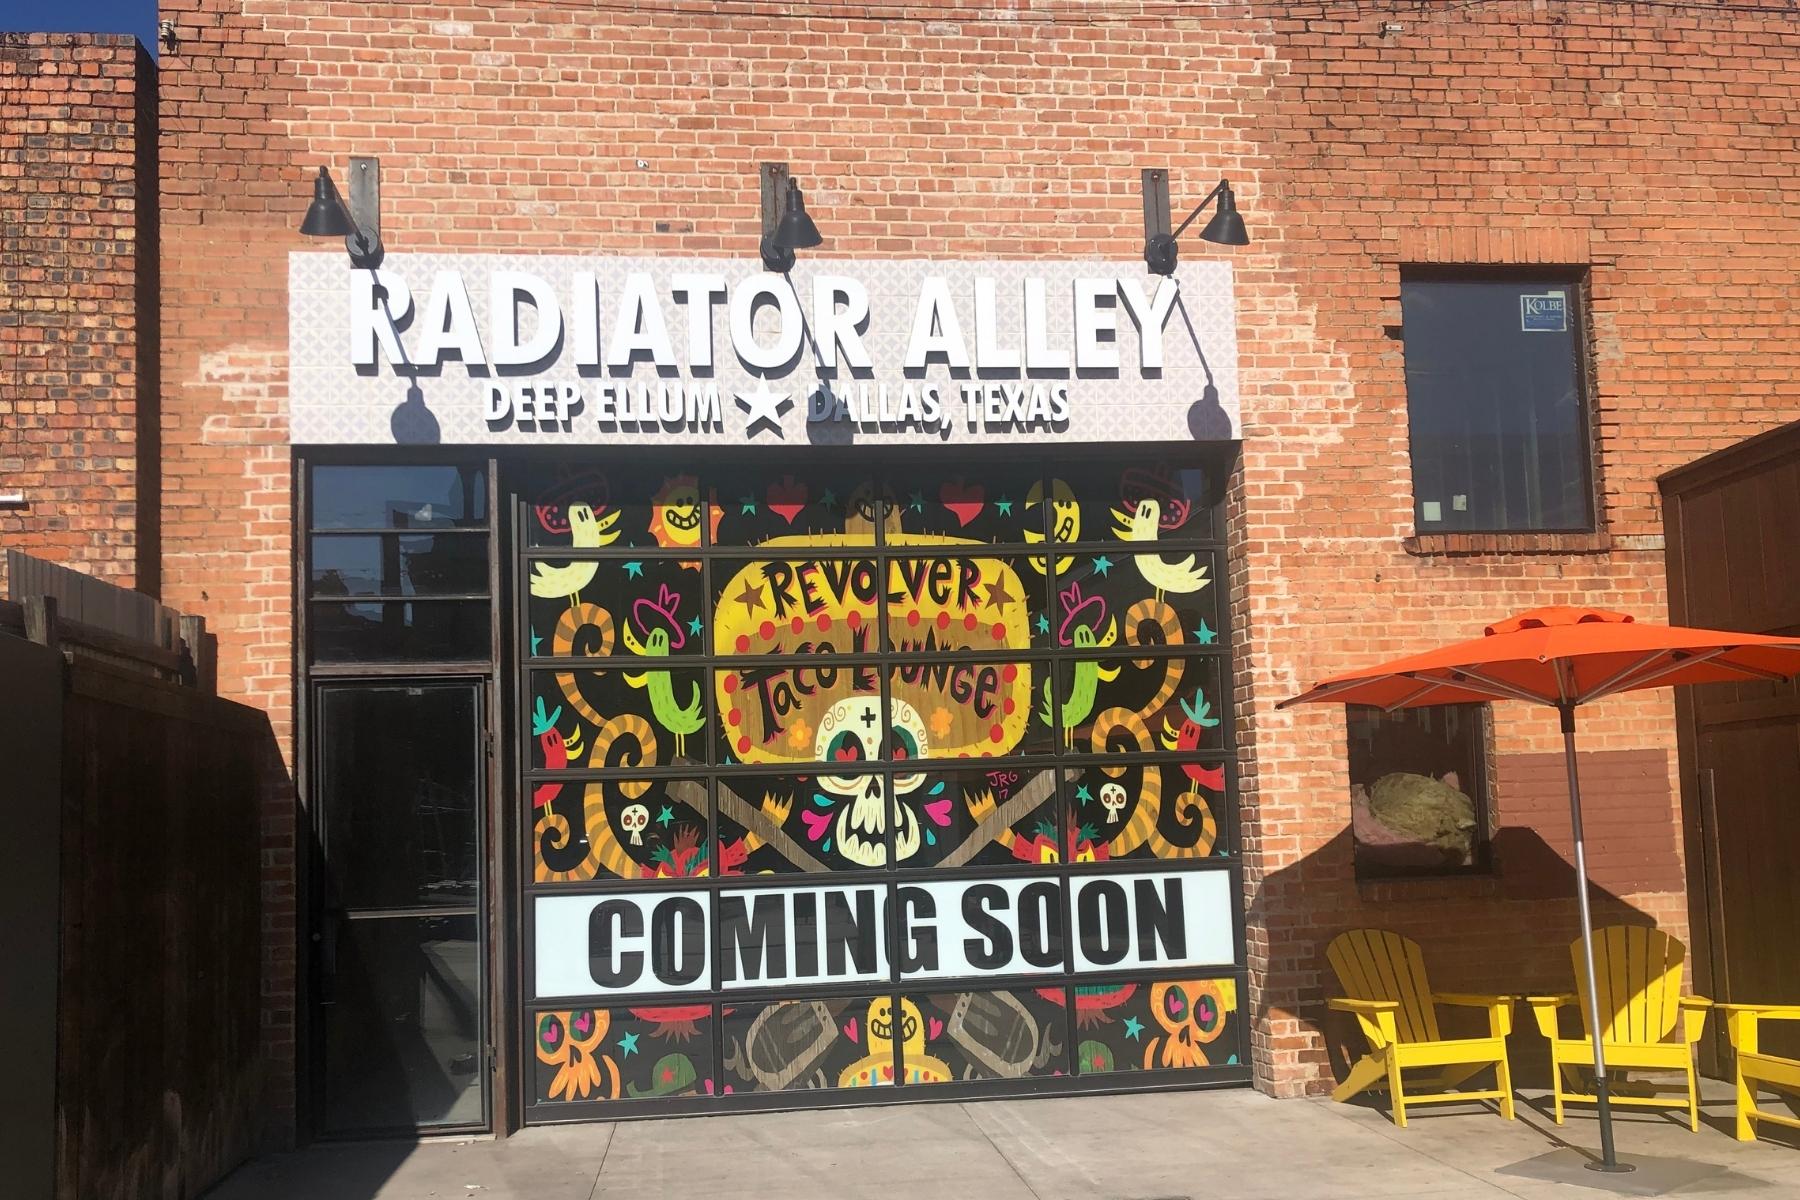 A “Coming Soon” sign for Revolver Taco Lounge in the Radiator Alley part of Deep Ellum in between Main and Elm streets.